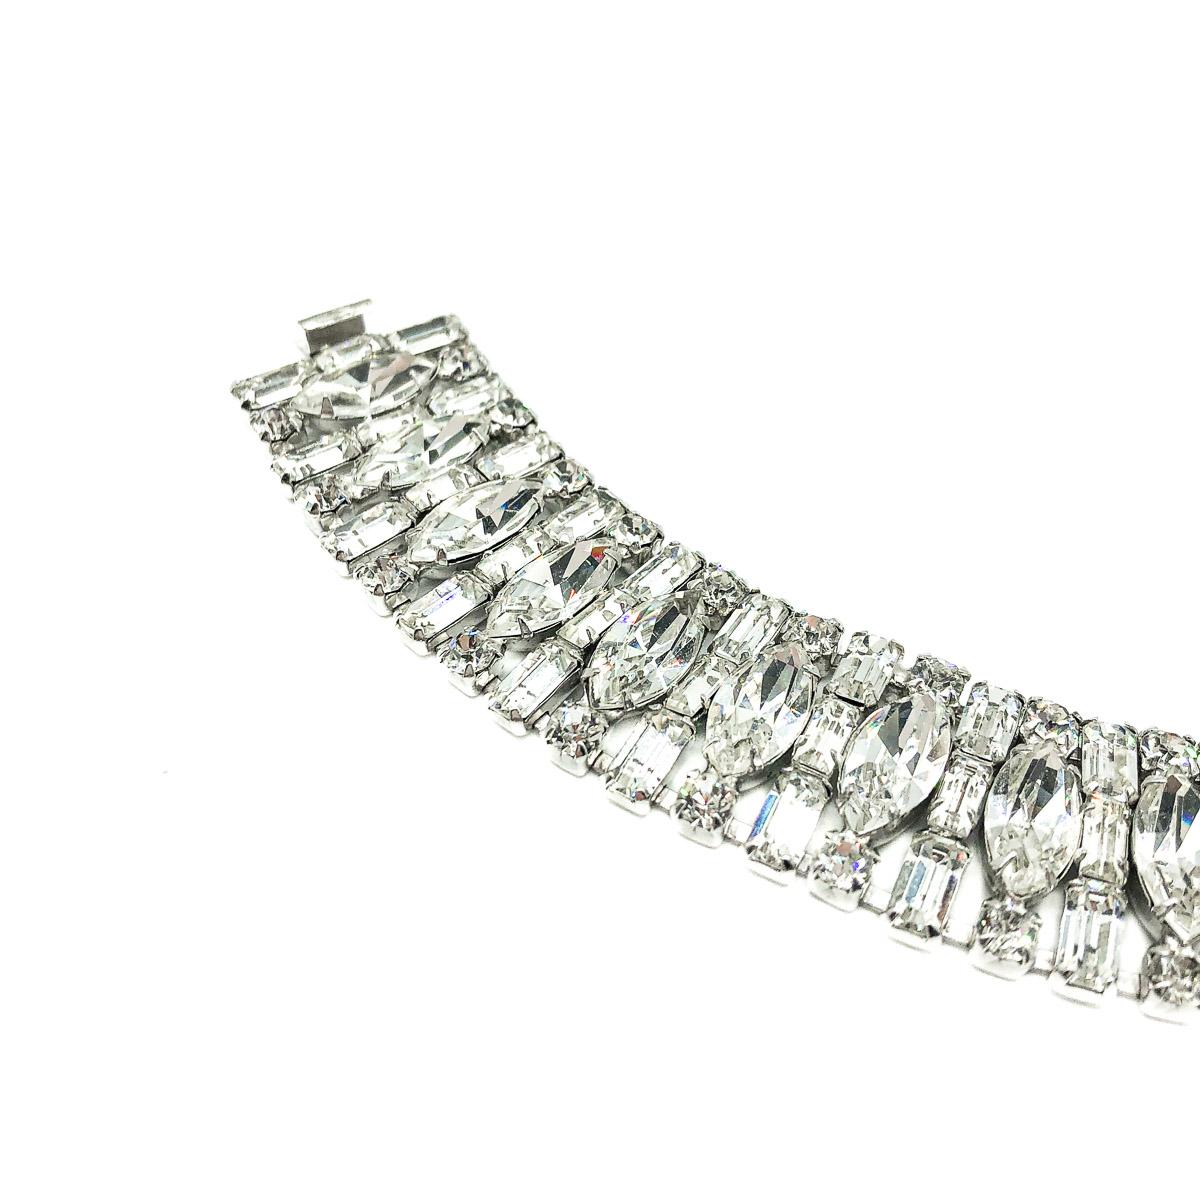 A divine Vintage Weiss Cocktail Bracelet. Featuring fancy cut crystals in baguette, marquise and chaton shapes. Claw set in rhodium plated metal. Weiss produced some of the highest quality mid century American costume jewellery and their pieces are